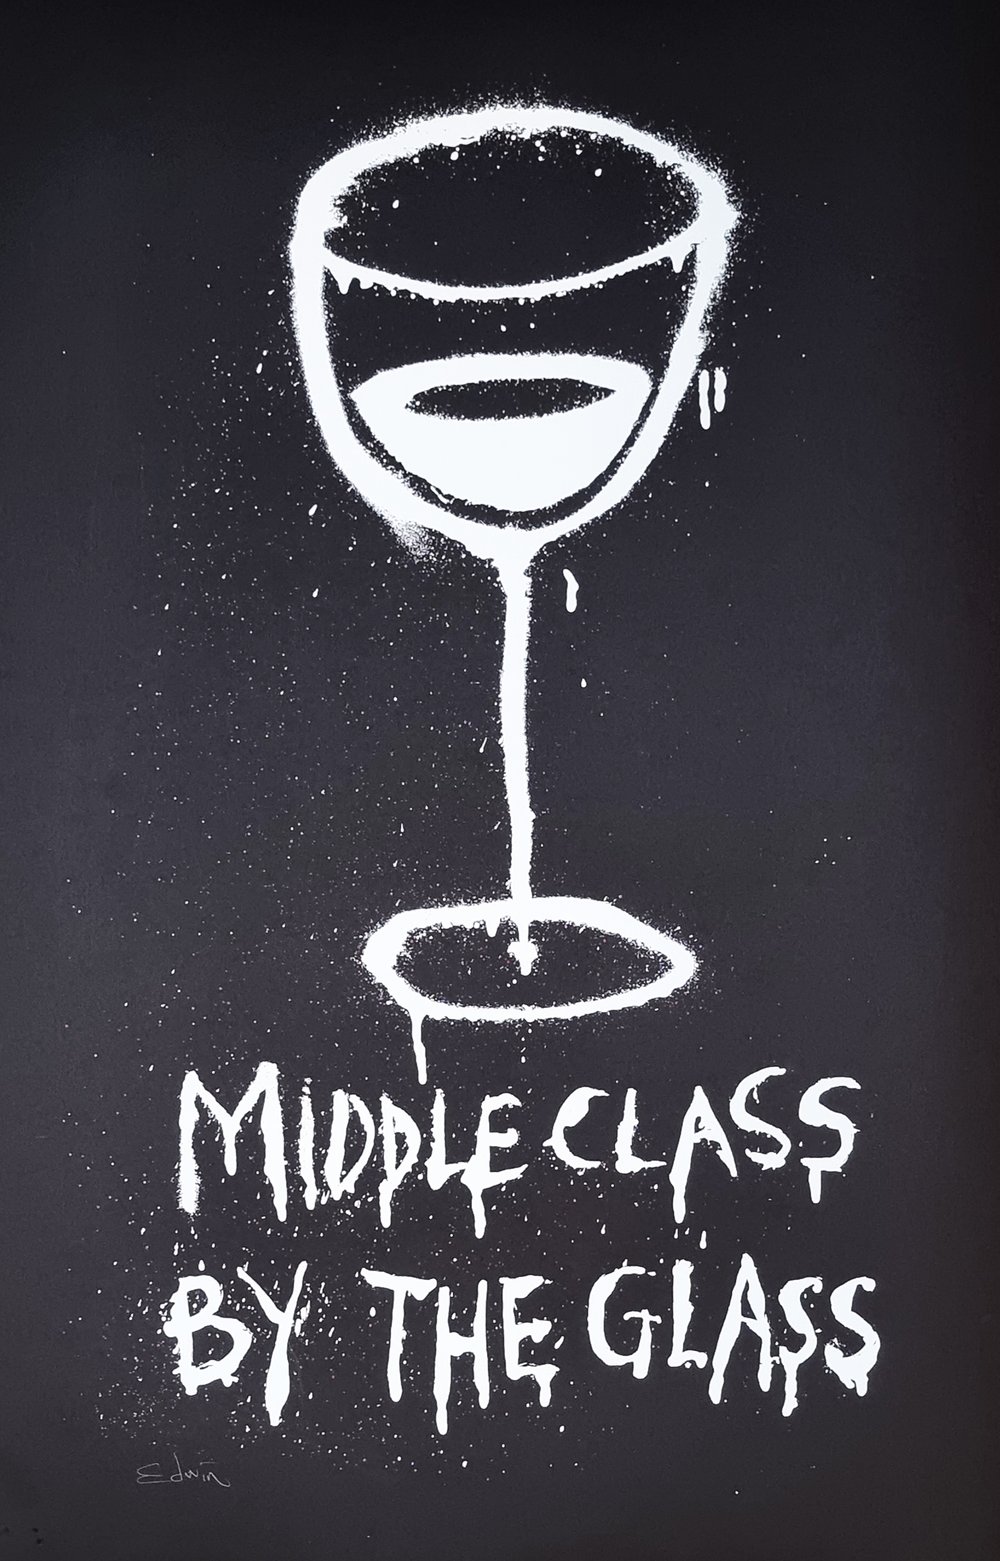 Image of Middle Class by the Glass’ (2017) by EDWIN